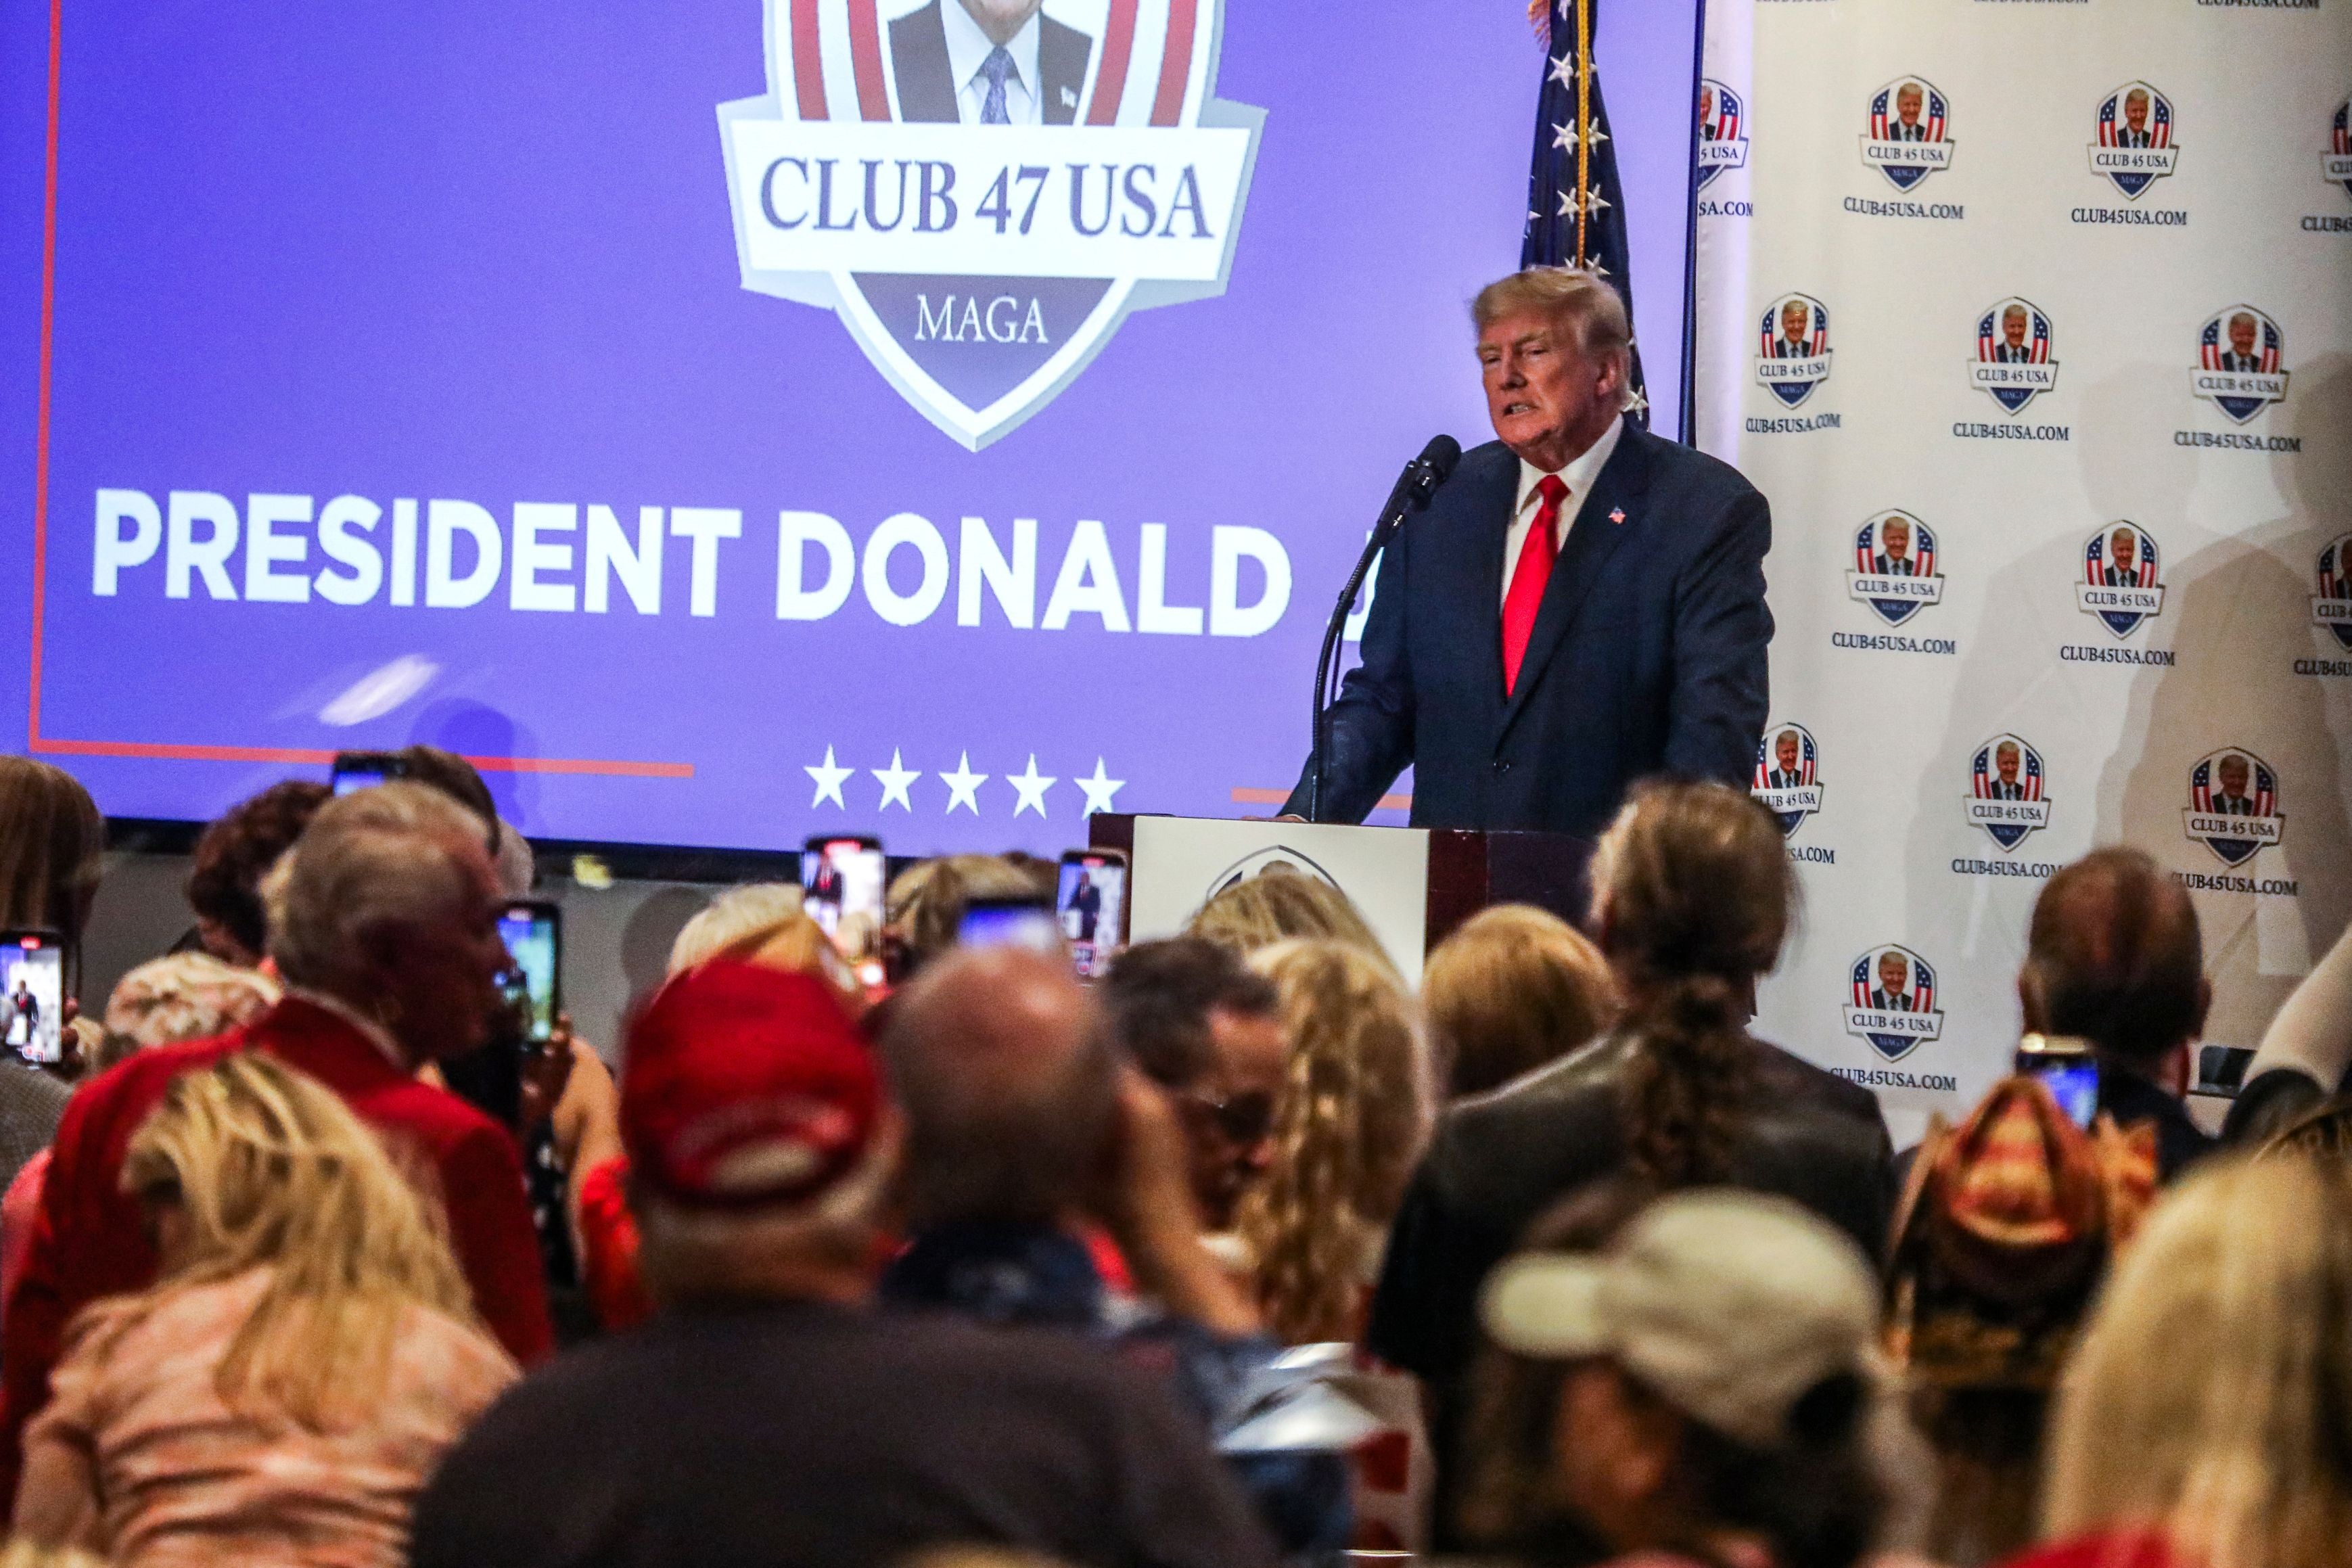 Former US President Donald Trump speaks to supporters during Trump's President Day event at the Hilton Palm Beach Airport in West Palm Beach, Florida, on February 20, 2023